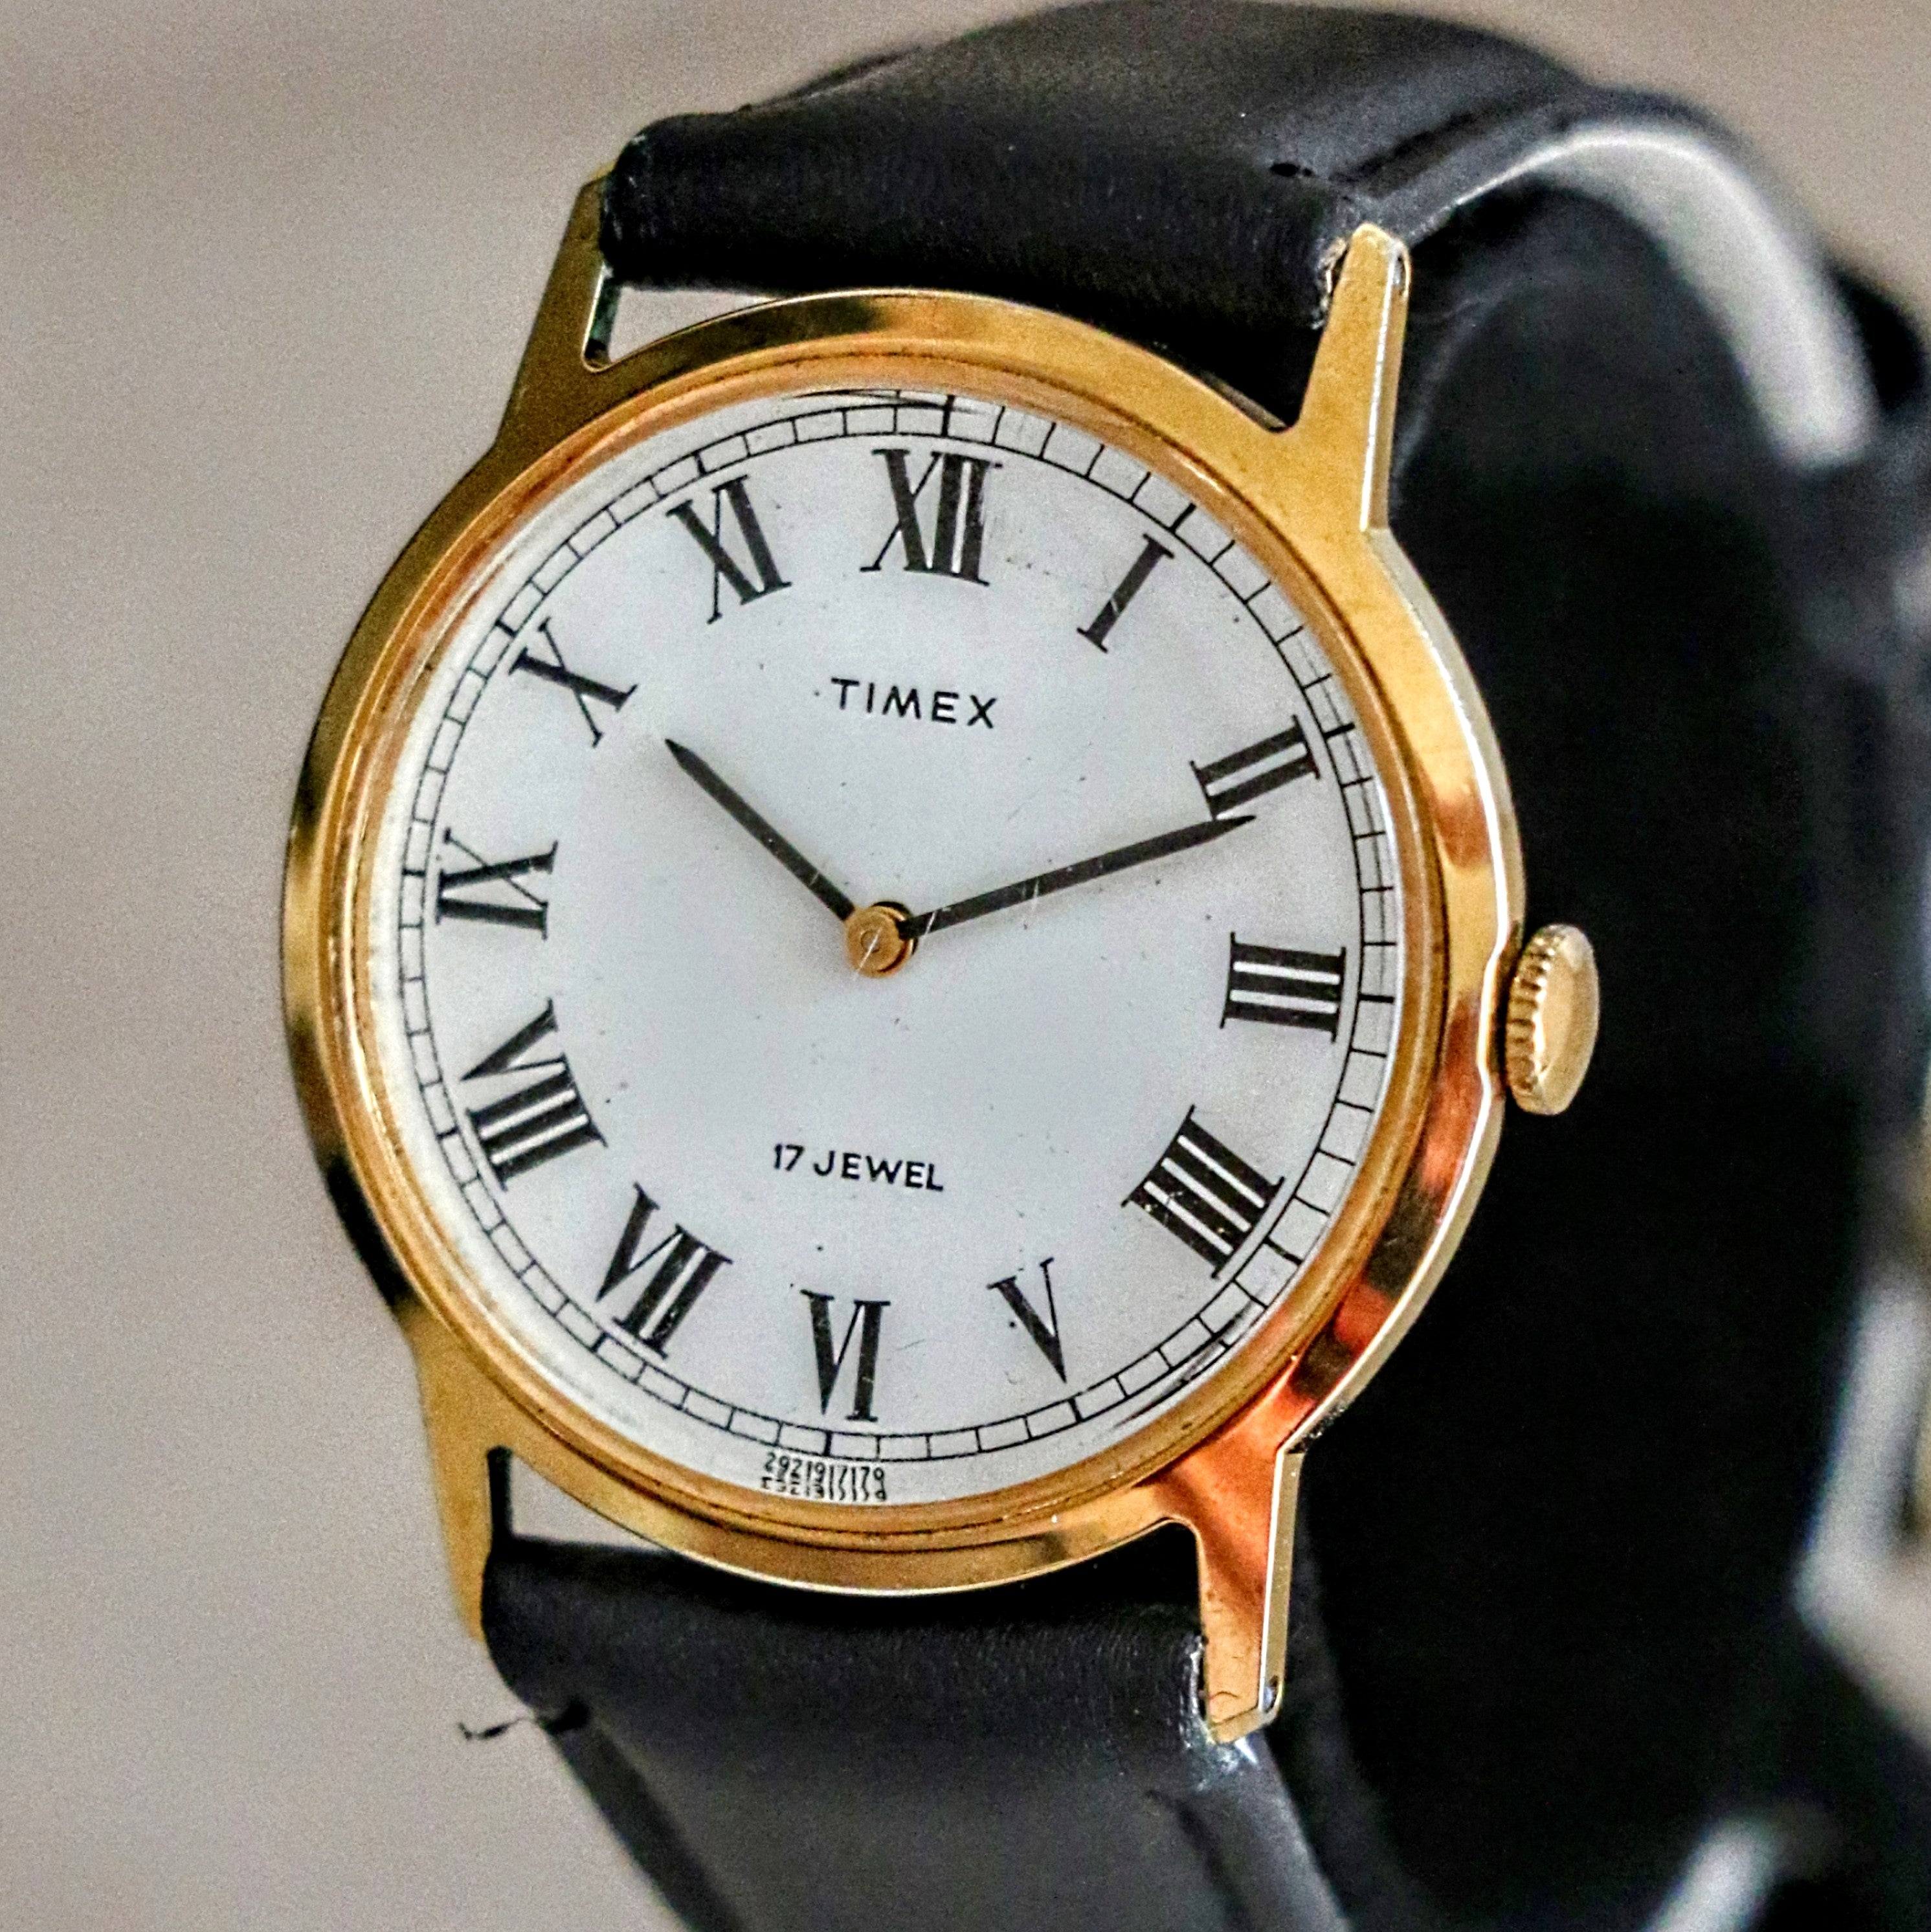 1979 TIMEX Watch Roman Numerals 17 Jewels Manual Wind 33mm Wristwatch –  SECOND HAND HOROLOGY